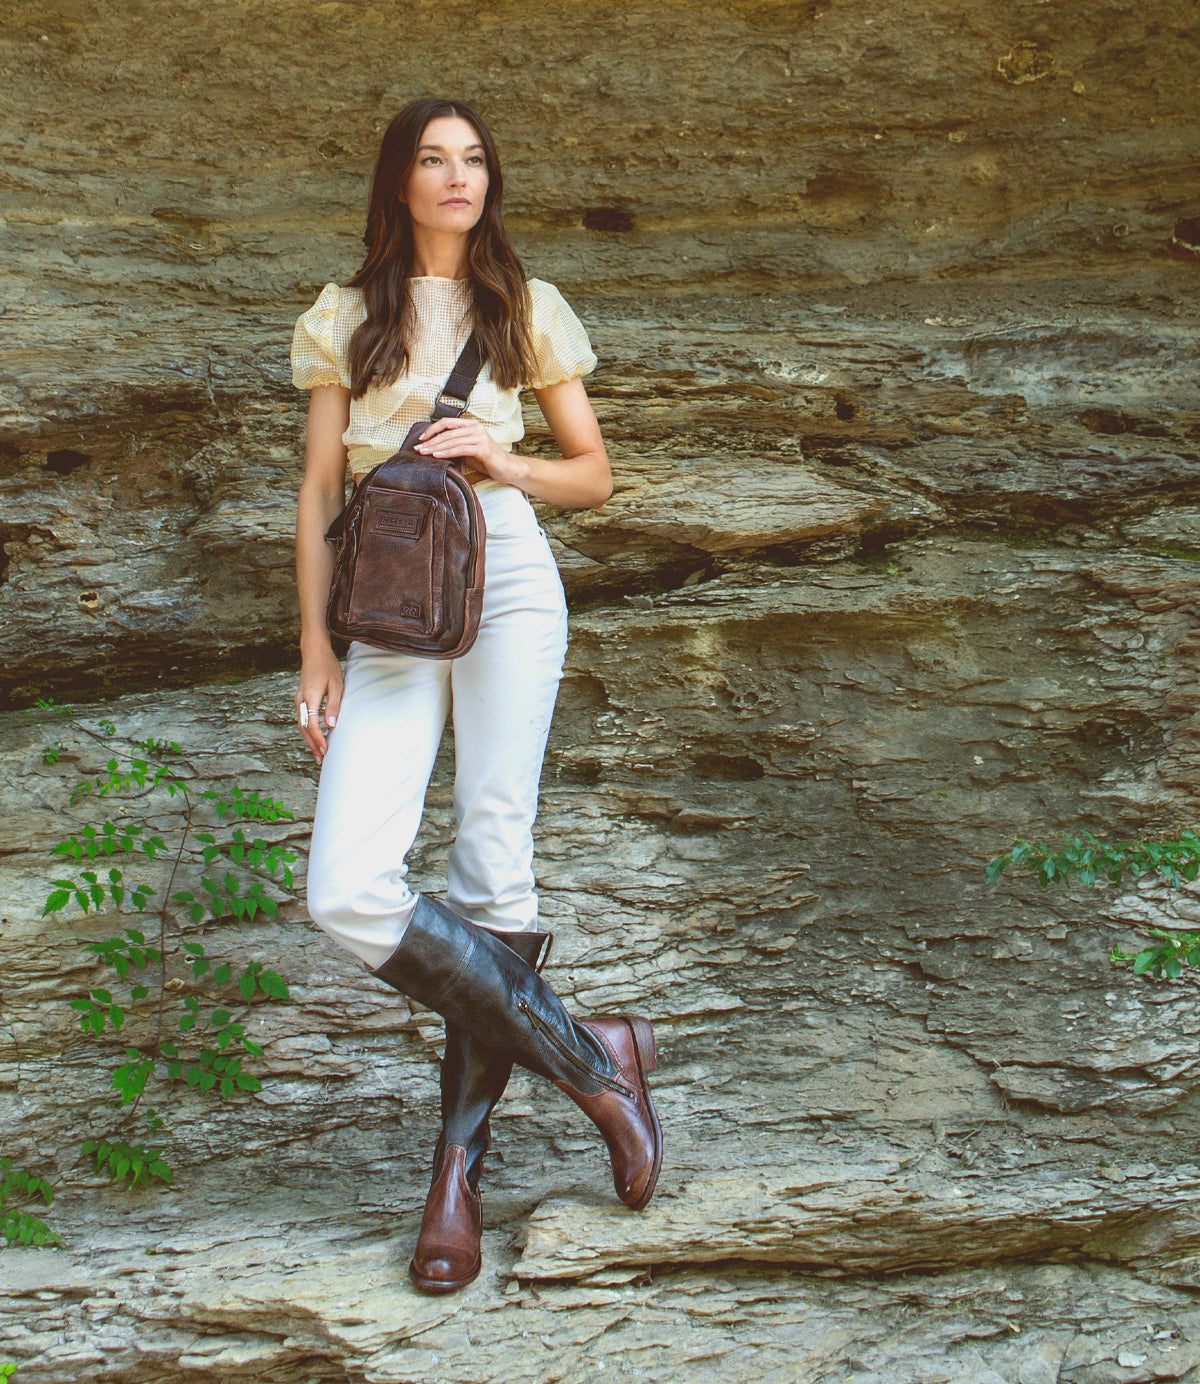 A woman is standing on a rock with a Beau sling backpack from Bed Stu, which features a durable strap holding the leather backpack.